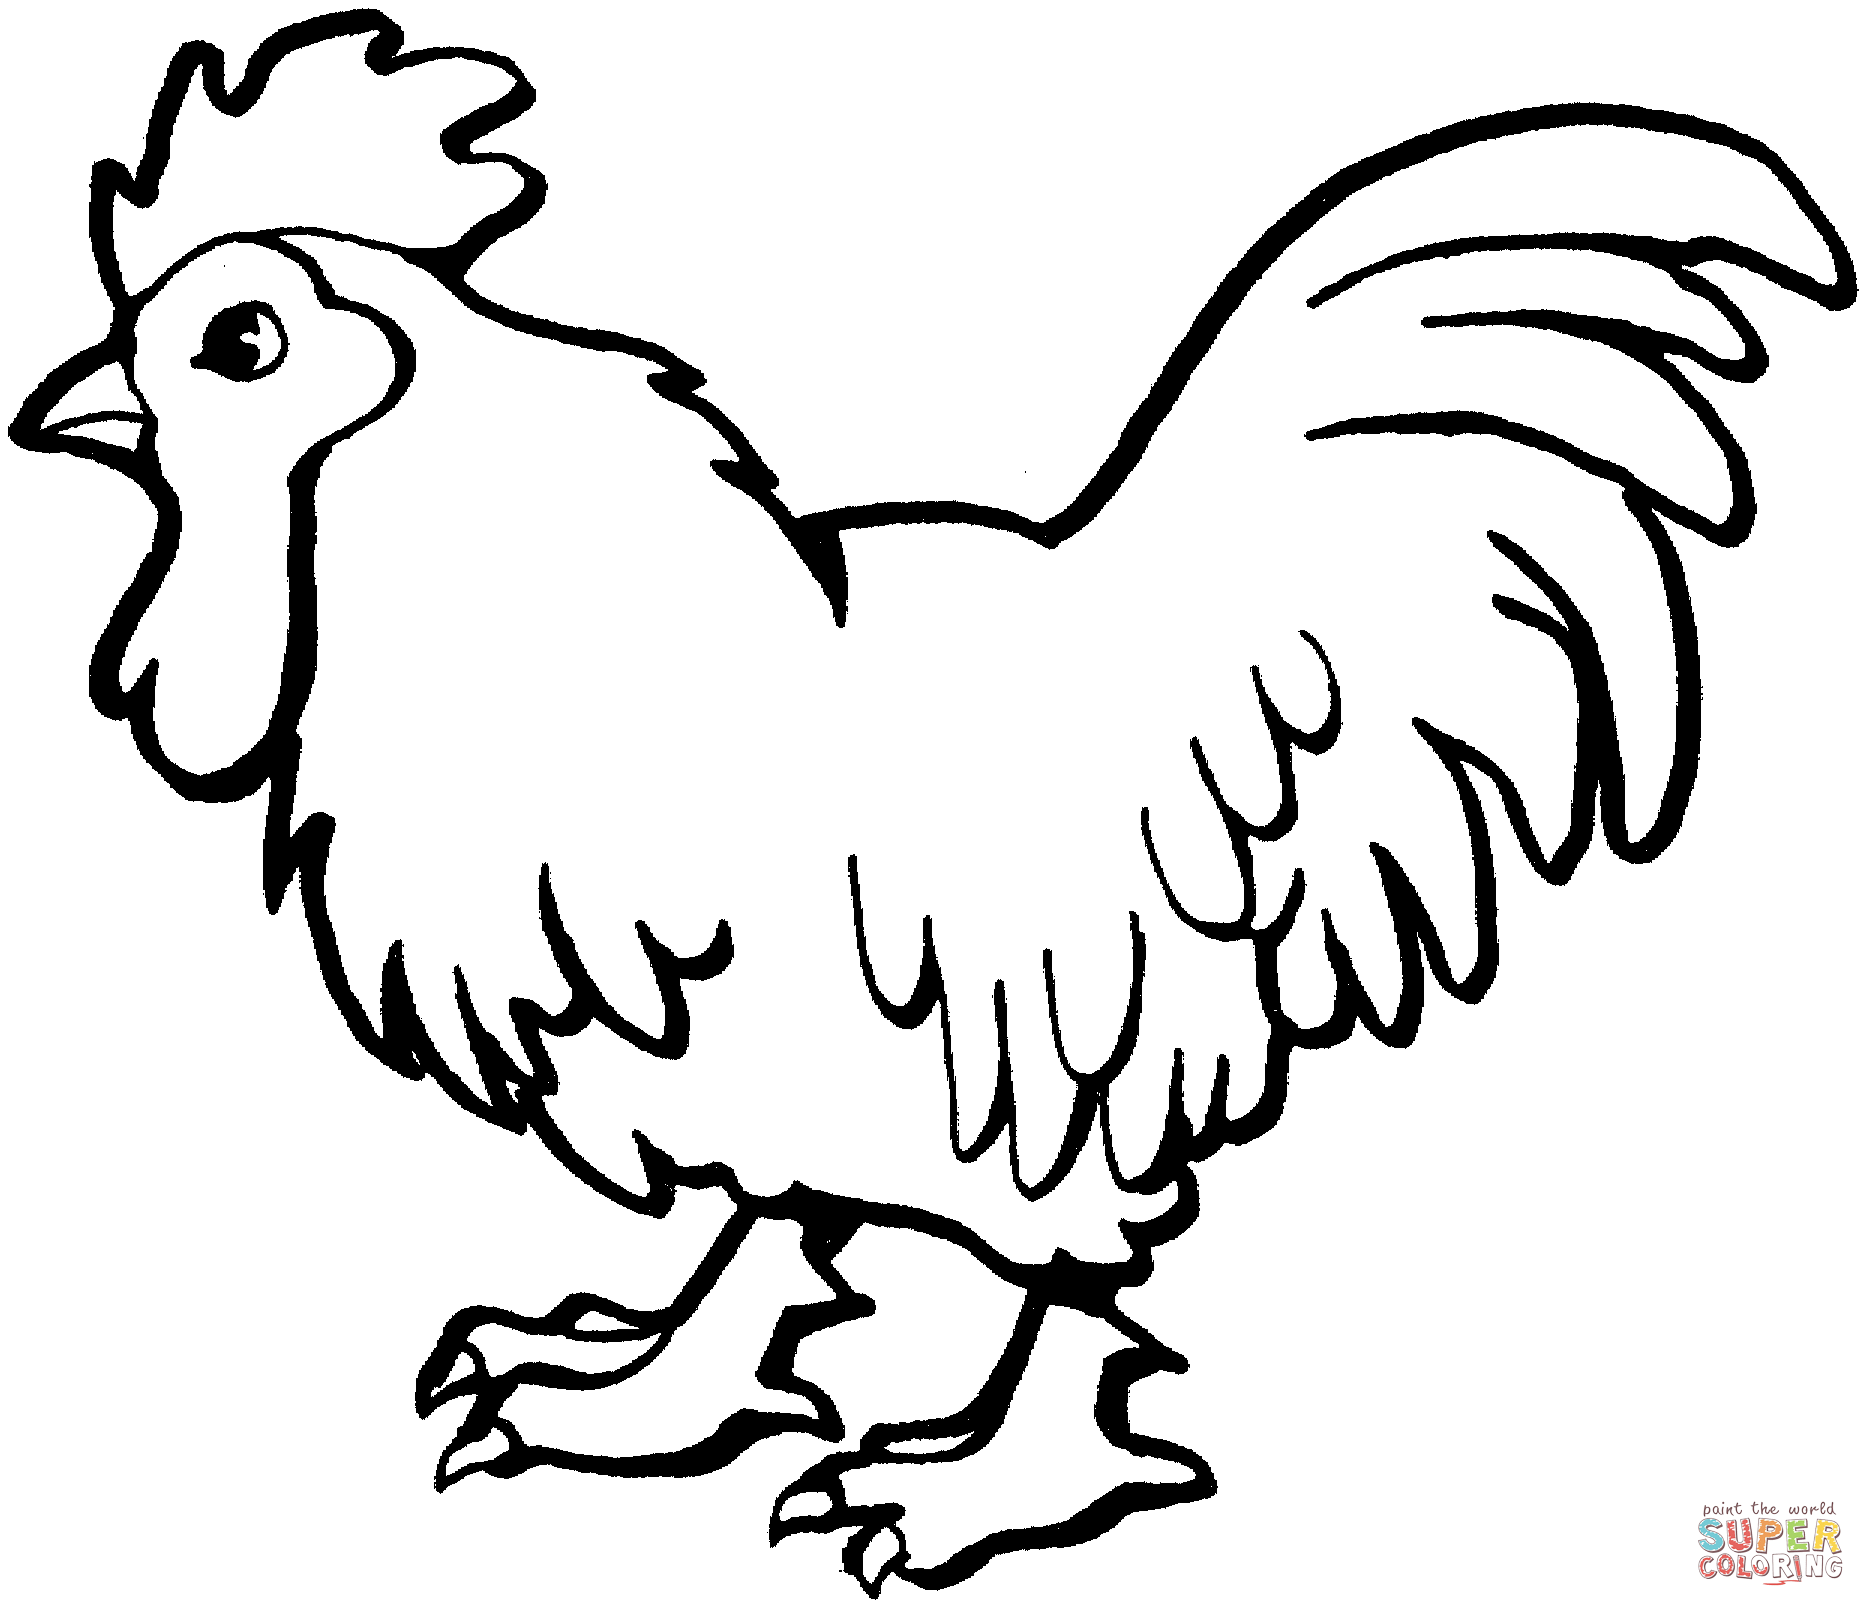 Red Junglefowl Rooster coloring page | Free Printable Coloring Pages